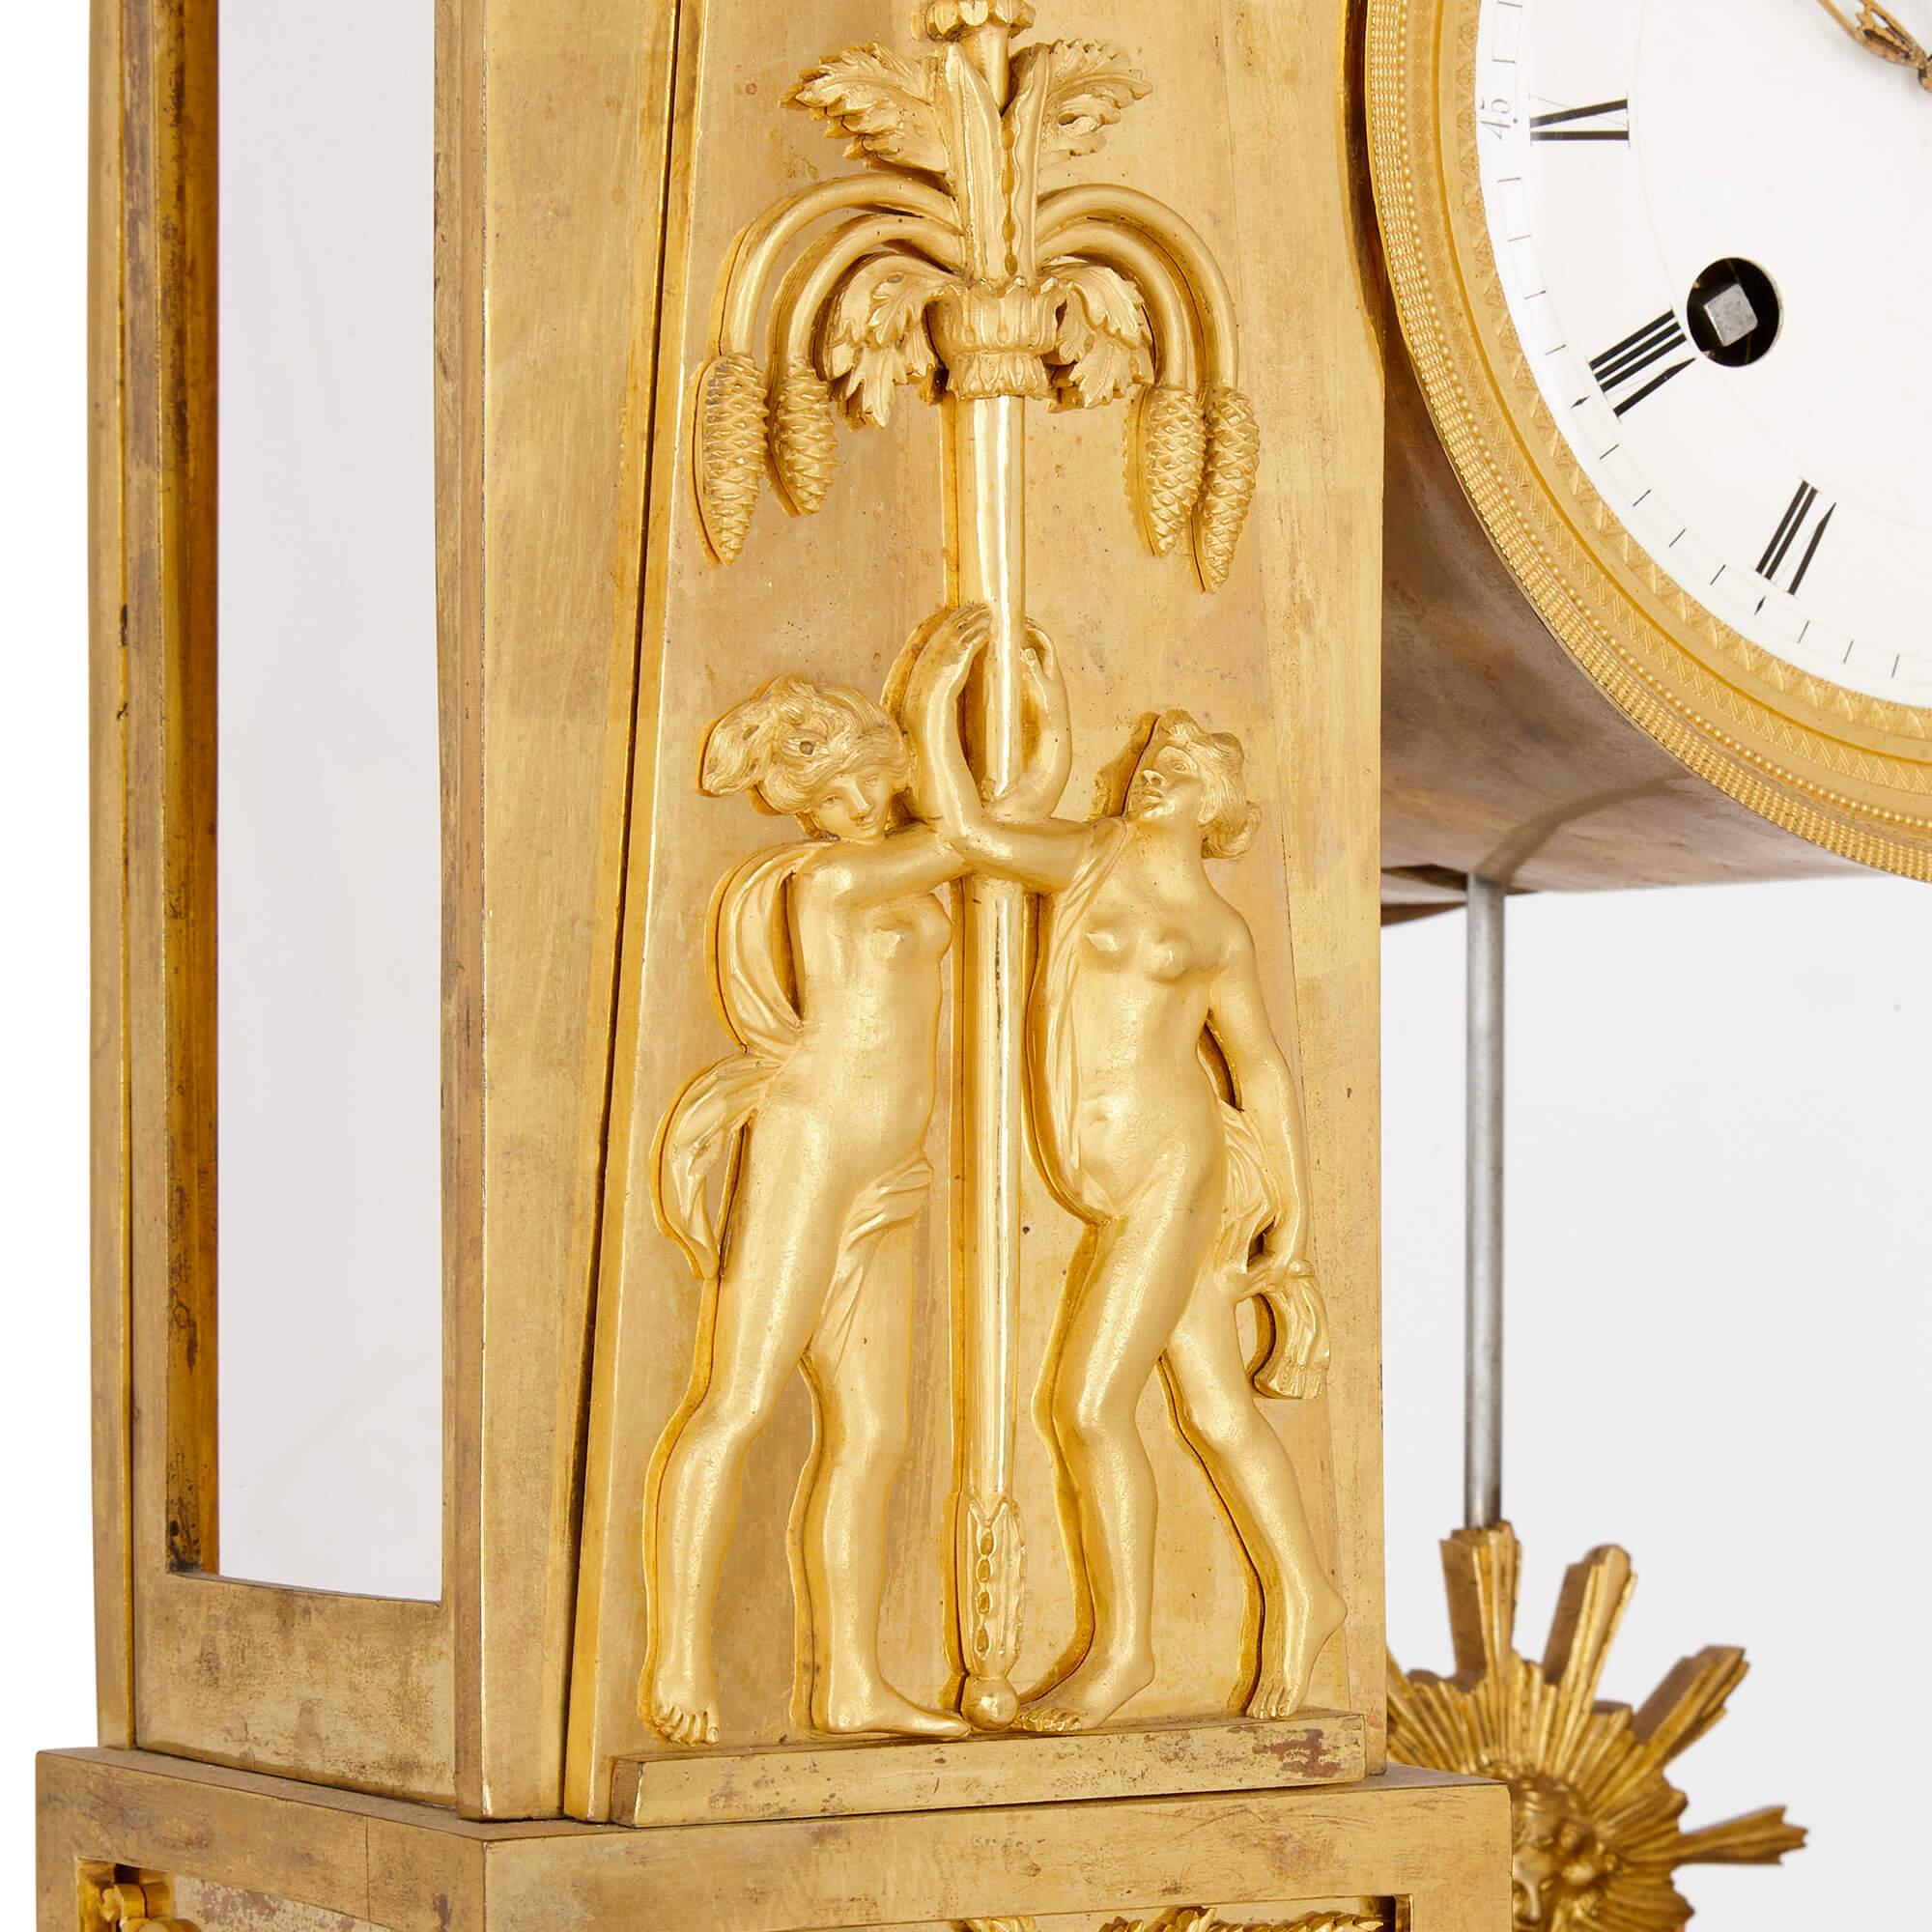 Large Antique Empire Period Gilt-Bronze Mantel Clock by Deverberie In Excellent Condition For Sale In London, GB